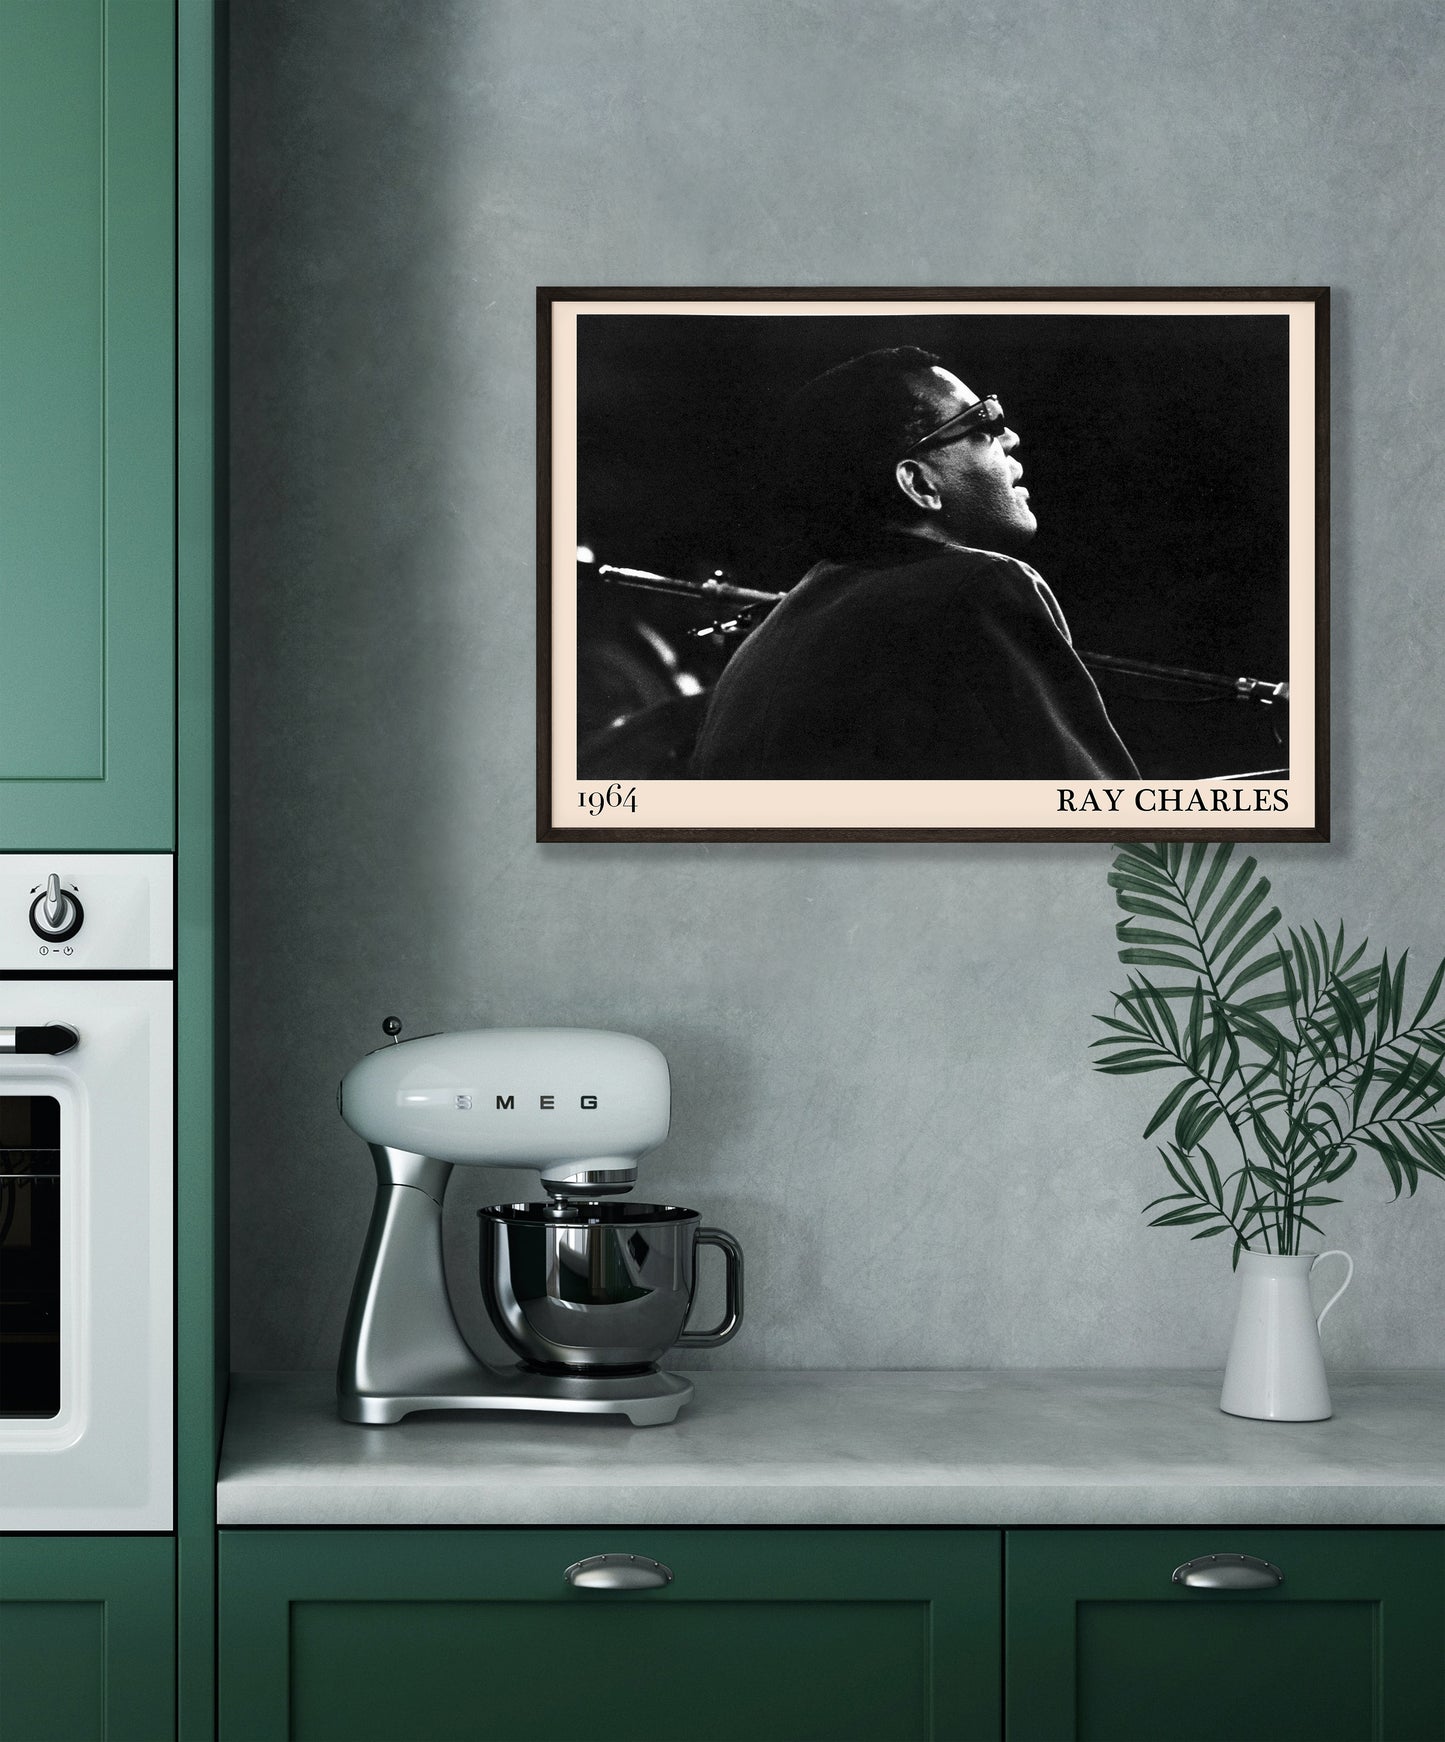  1964 photograph of blues legend Ray Charles, transformed into a retro black-framed poster hanging on a green kitchen wall